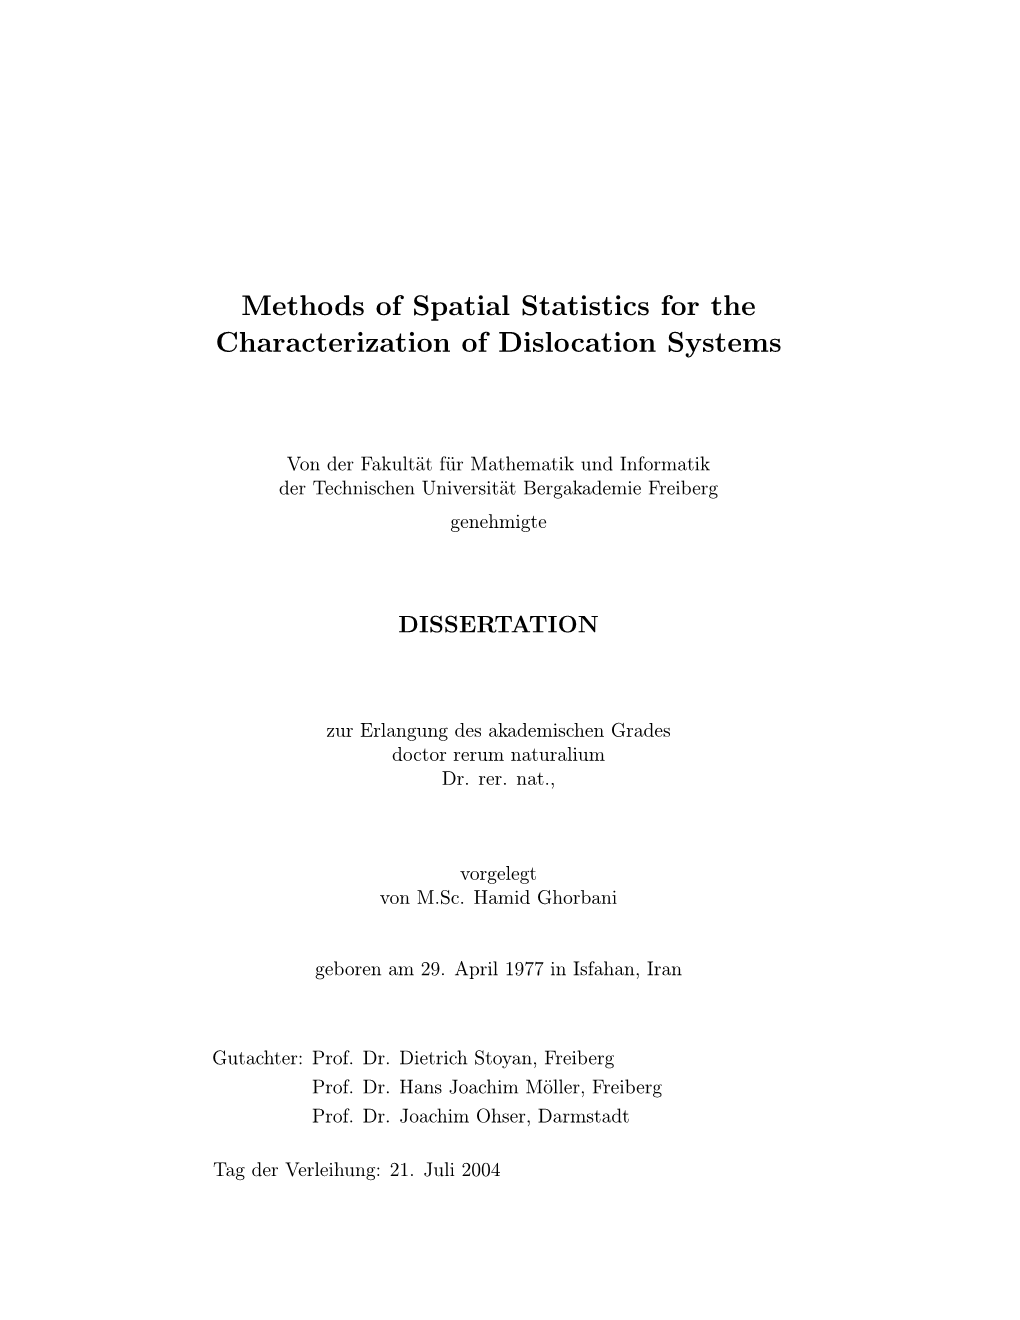 Methods of Spatial Statistics for the Characterization of Dislocation Systems